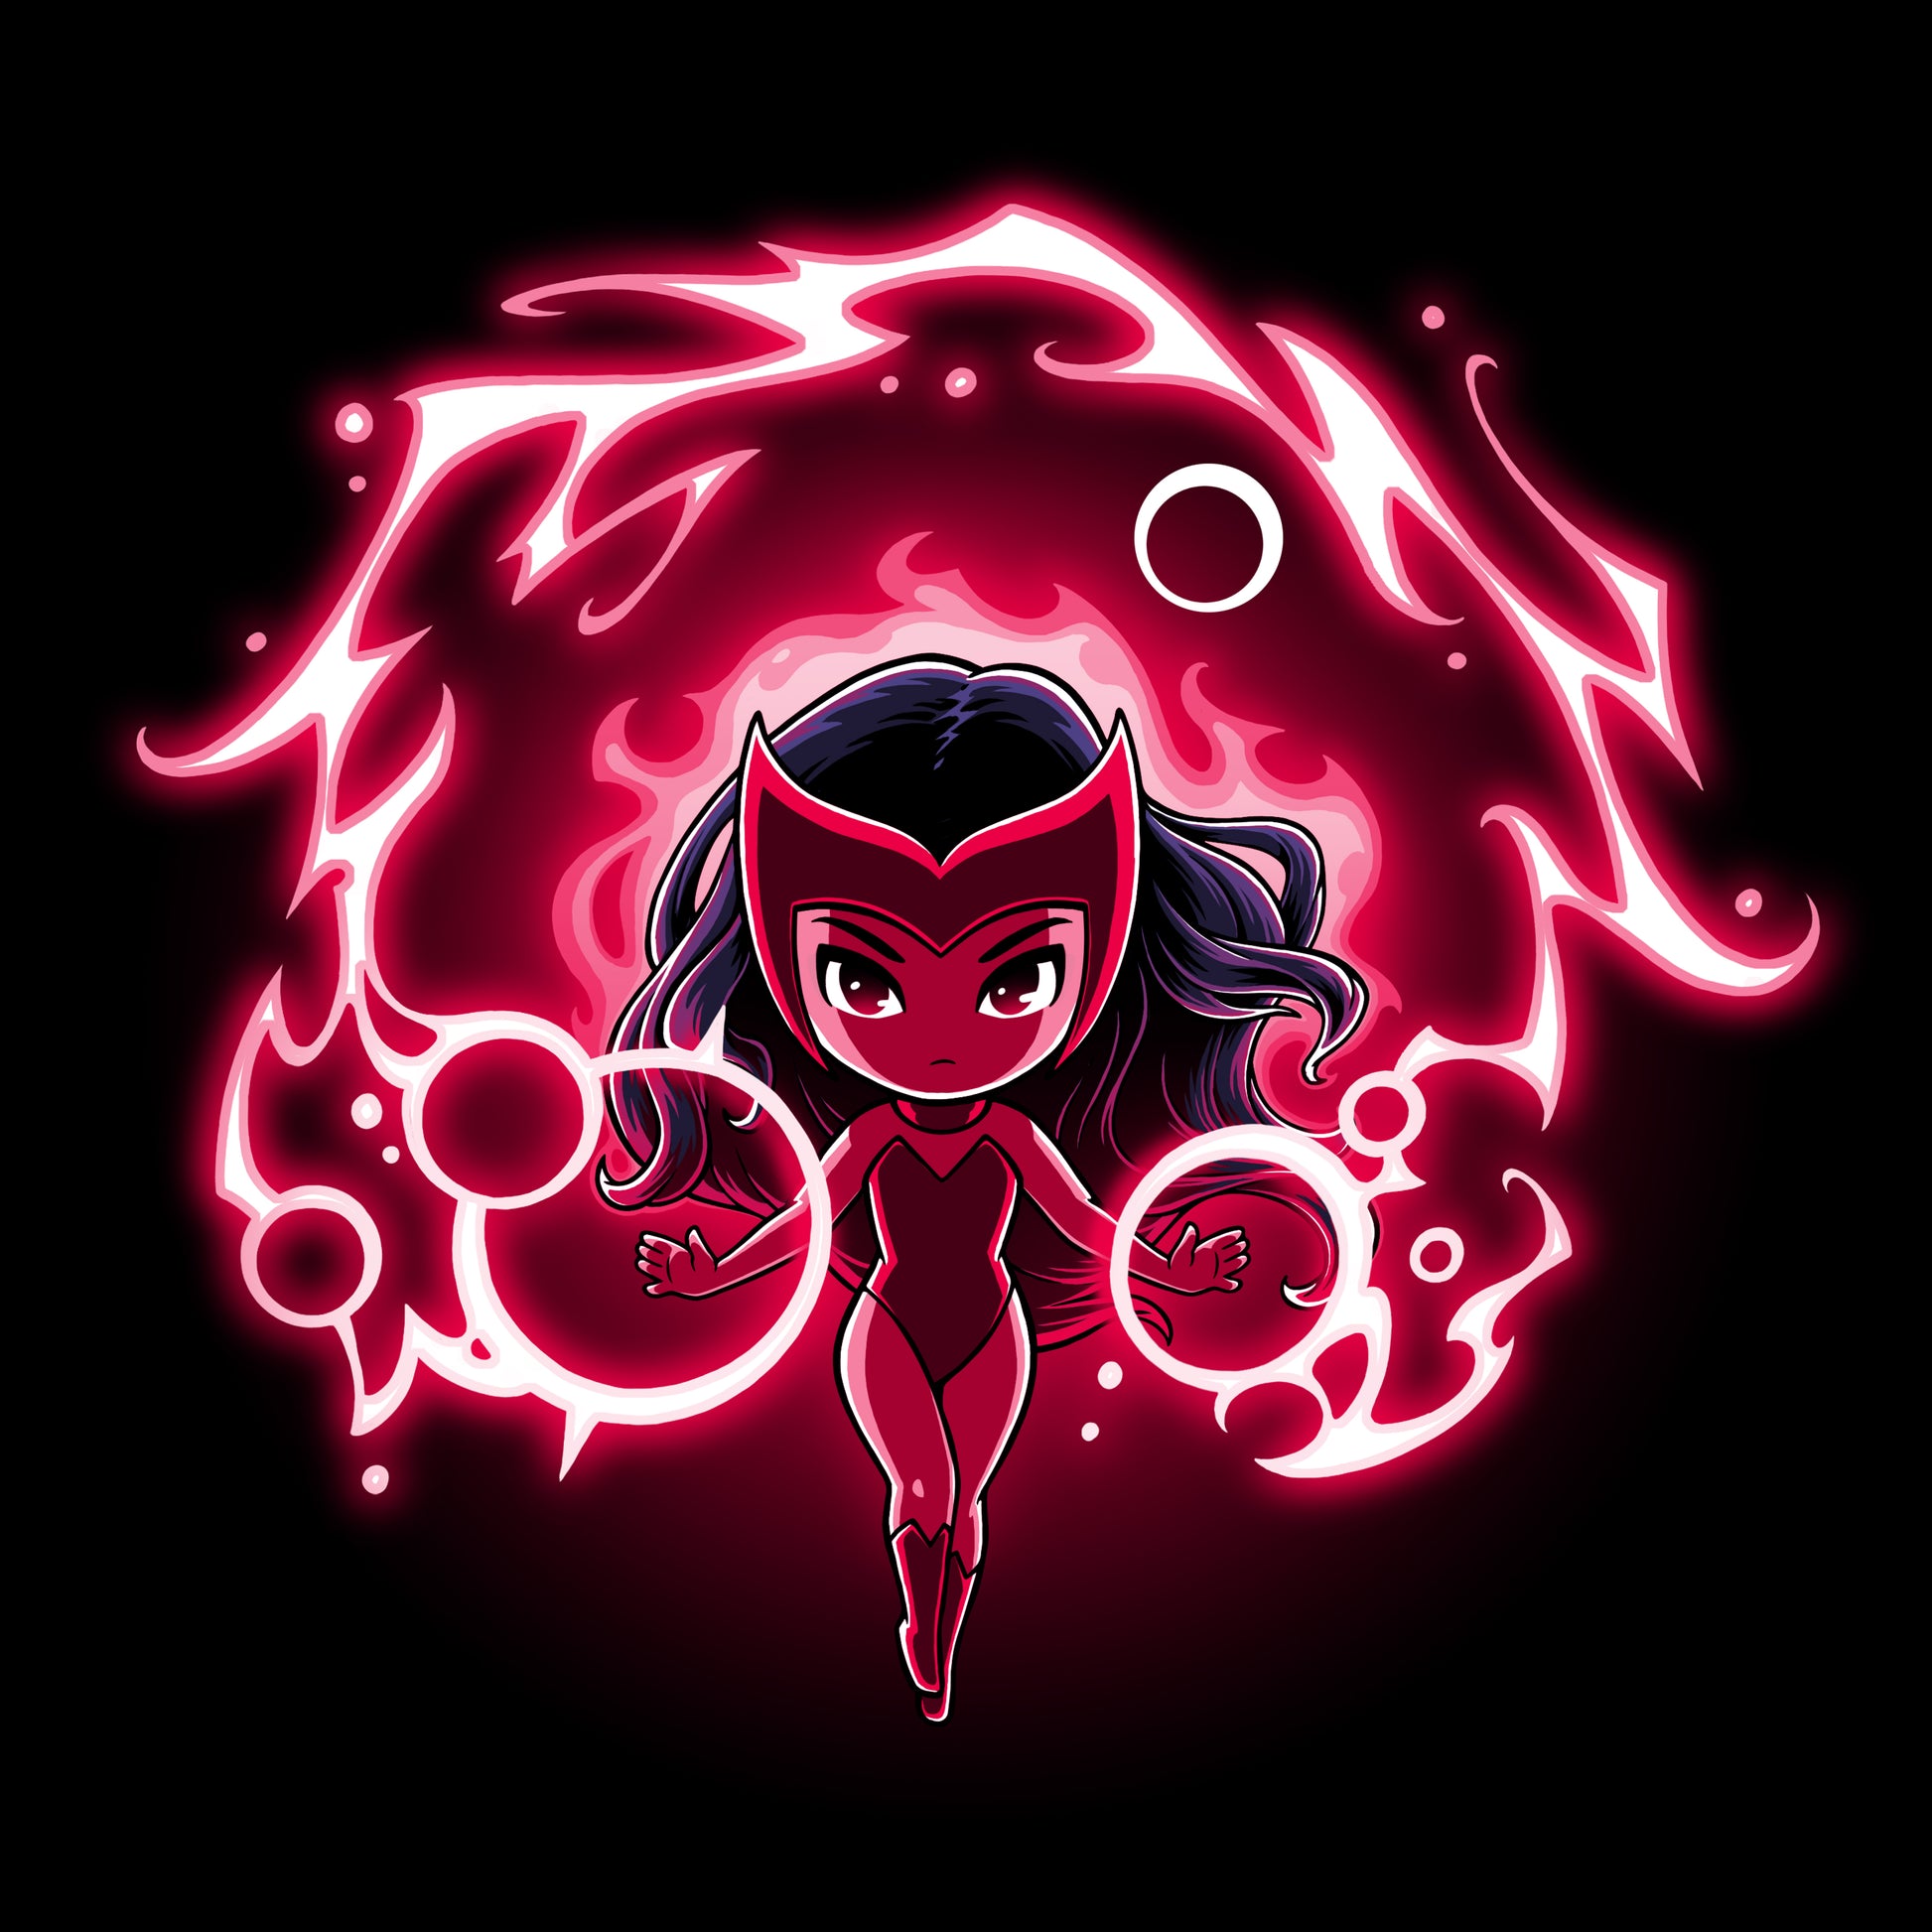 A black and red image of a woman in a red dress displaying Chaos magic on a Marvel Scarlet Witch T-shirt.